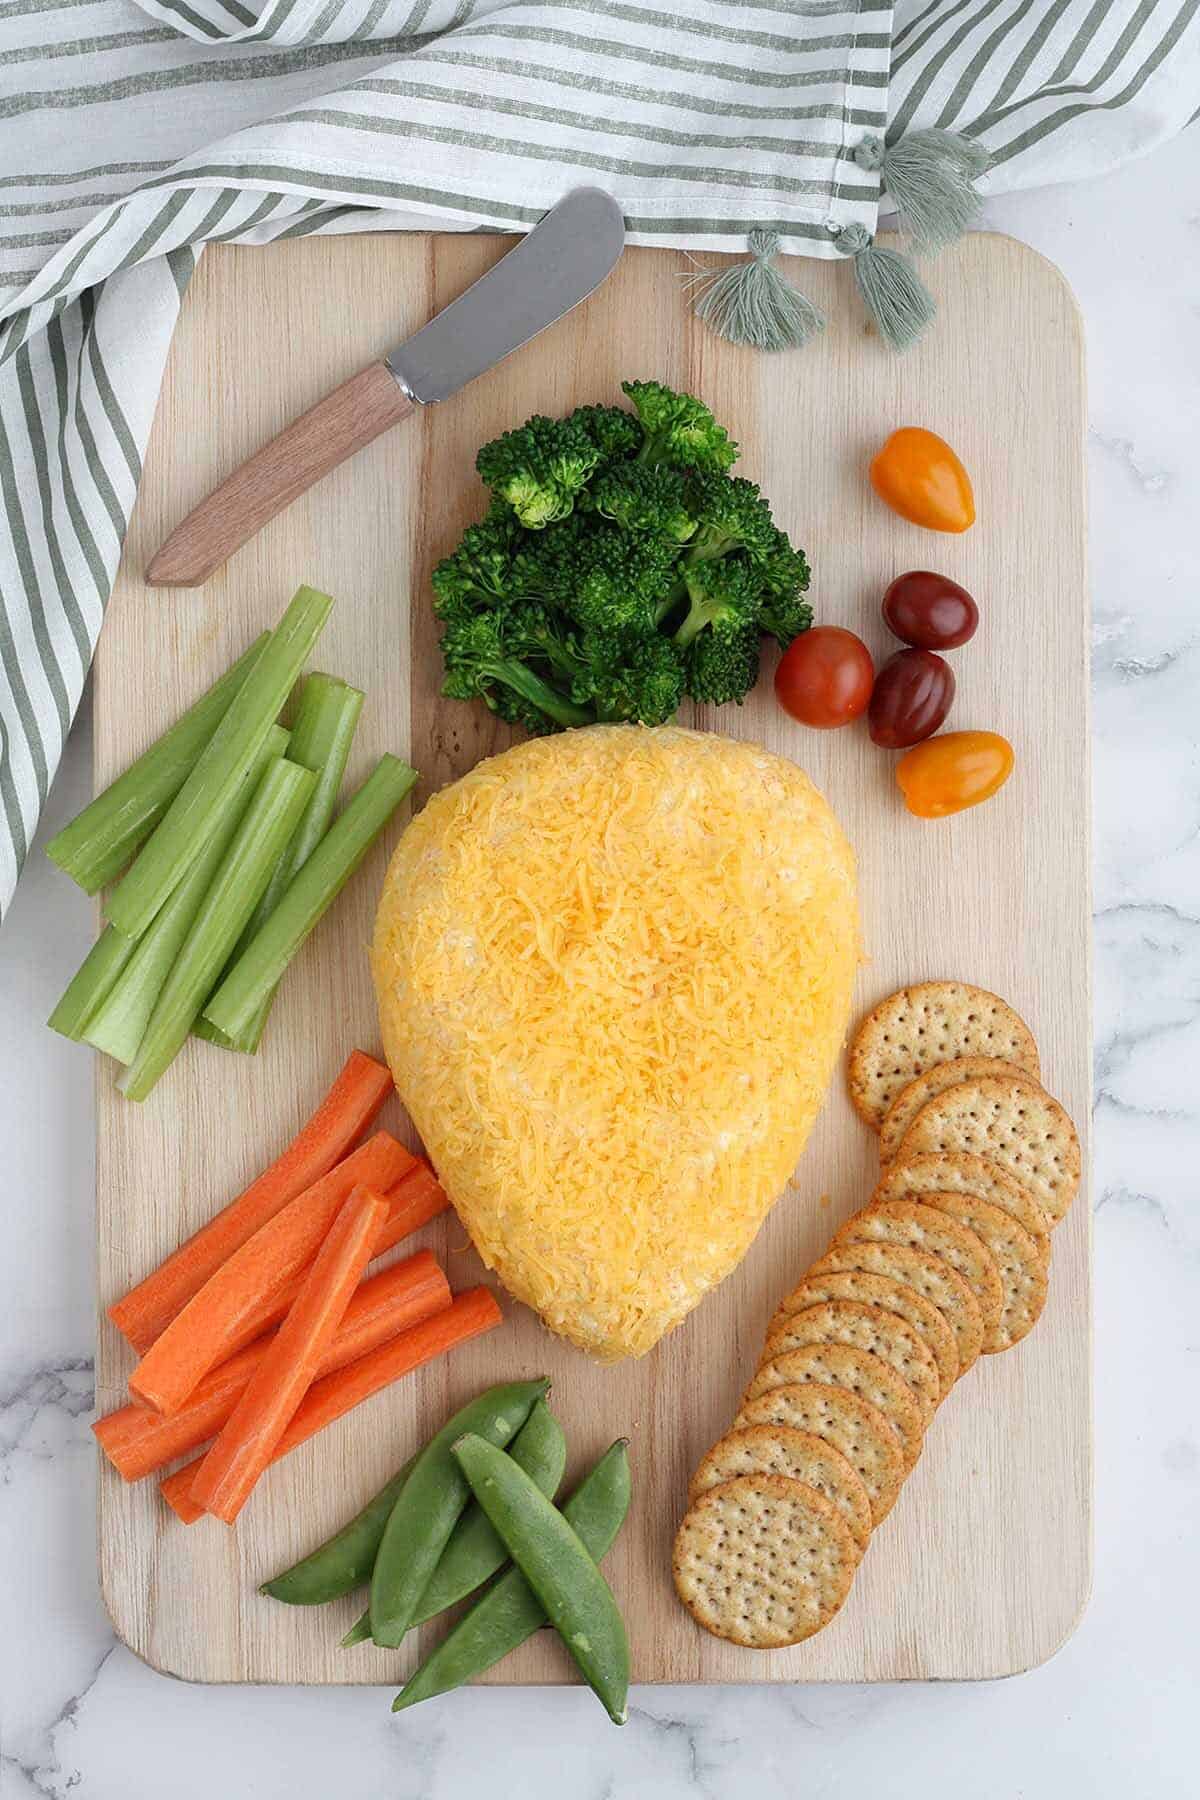 Top shot of a cheese ball with carrots on top and served with assorted vegetables and crackers